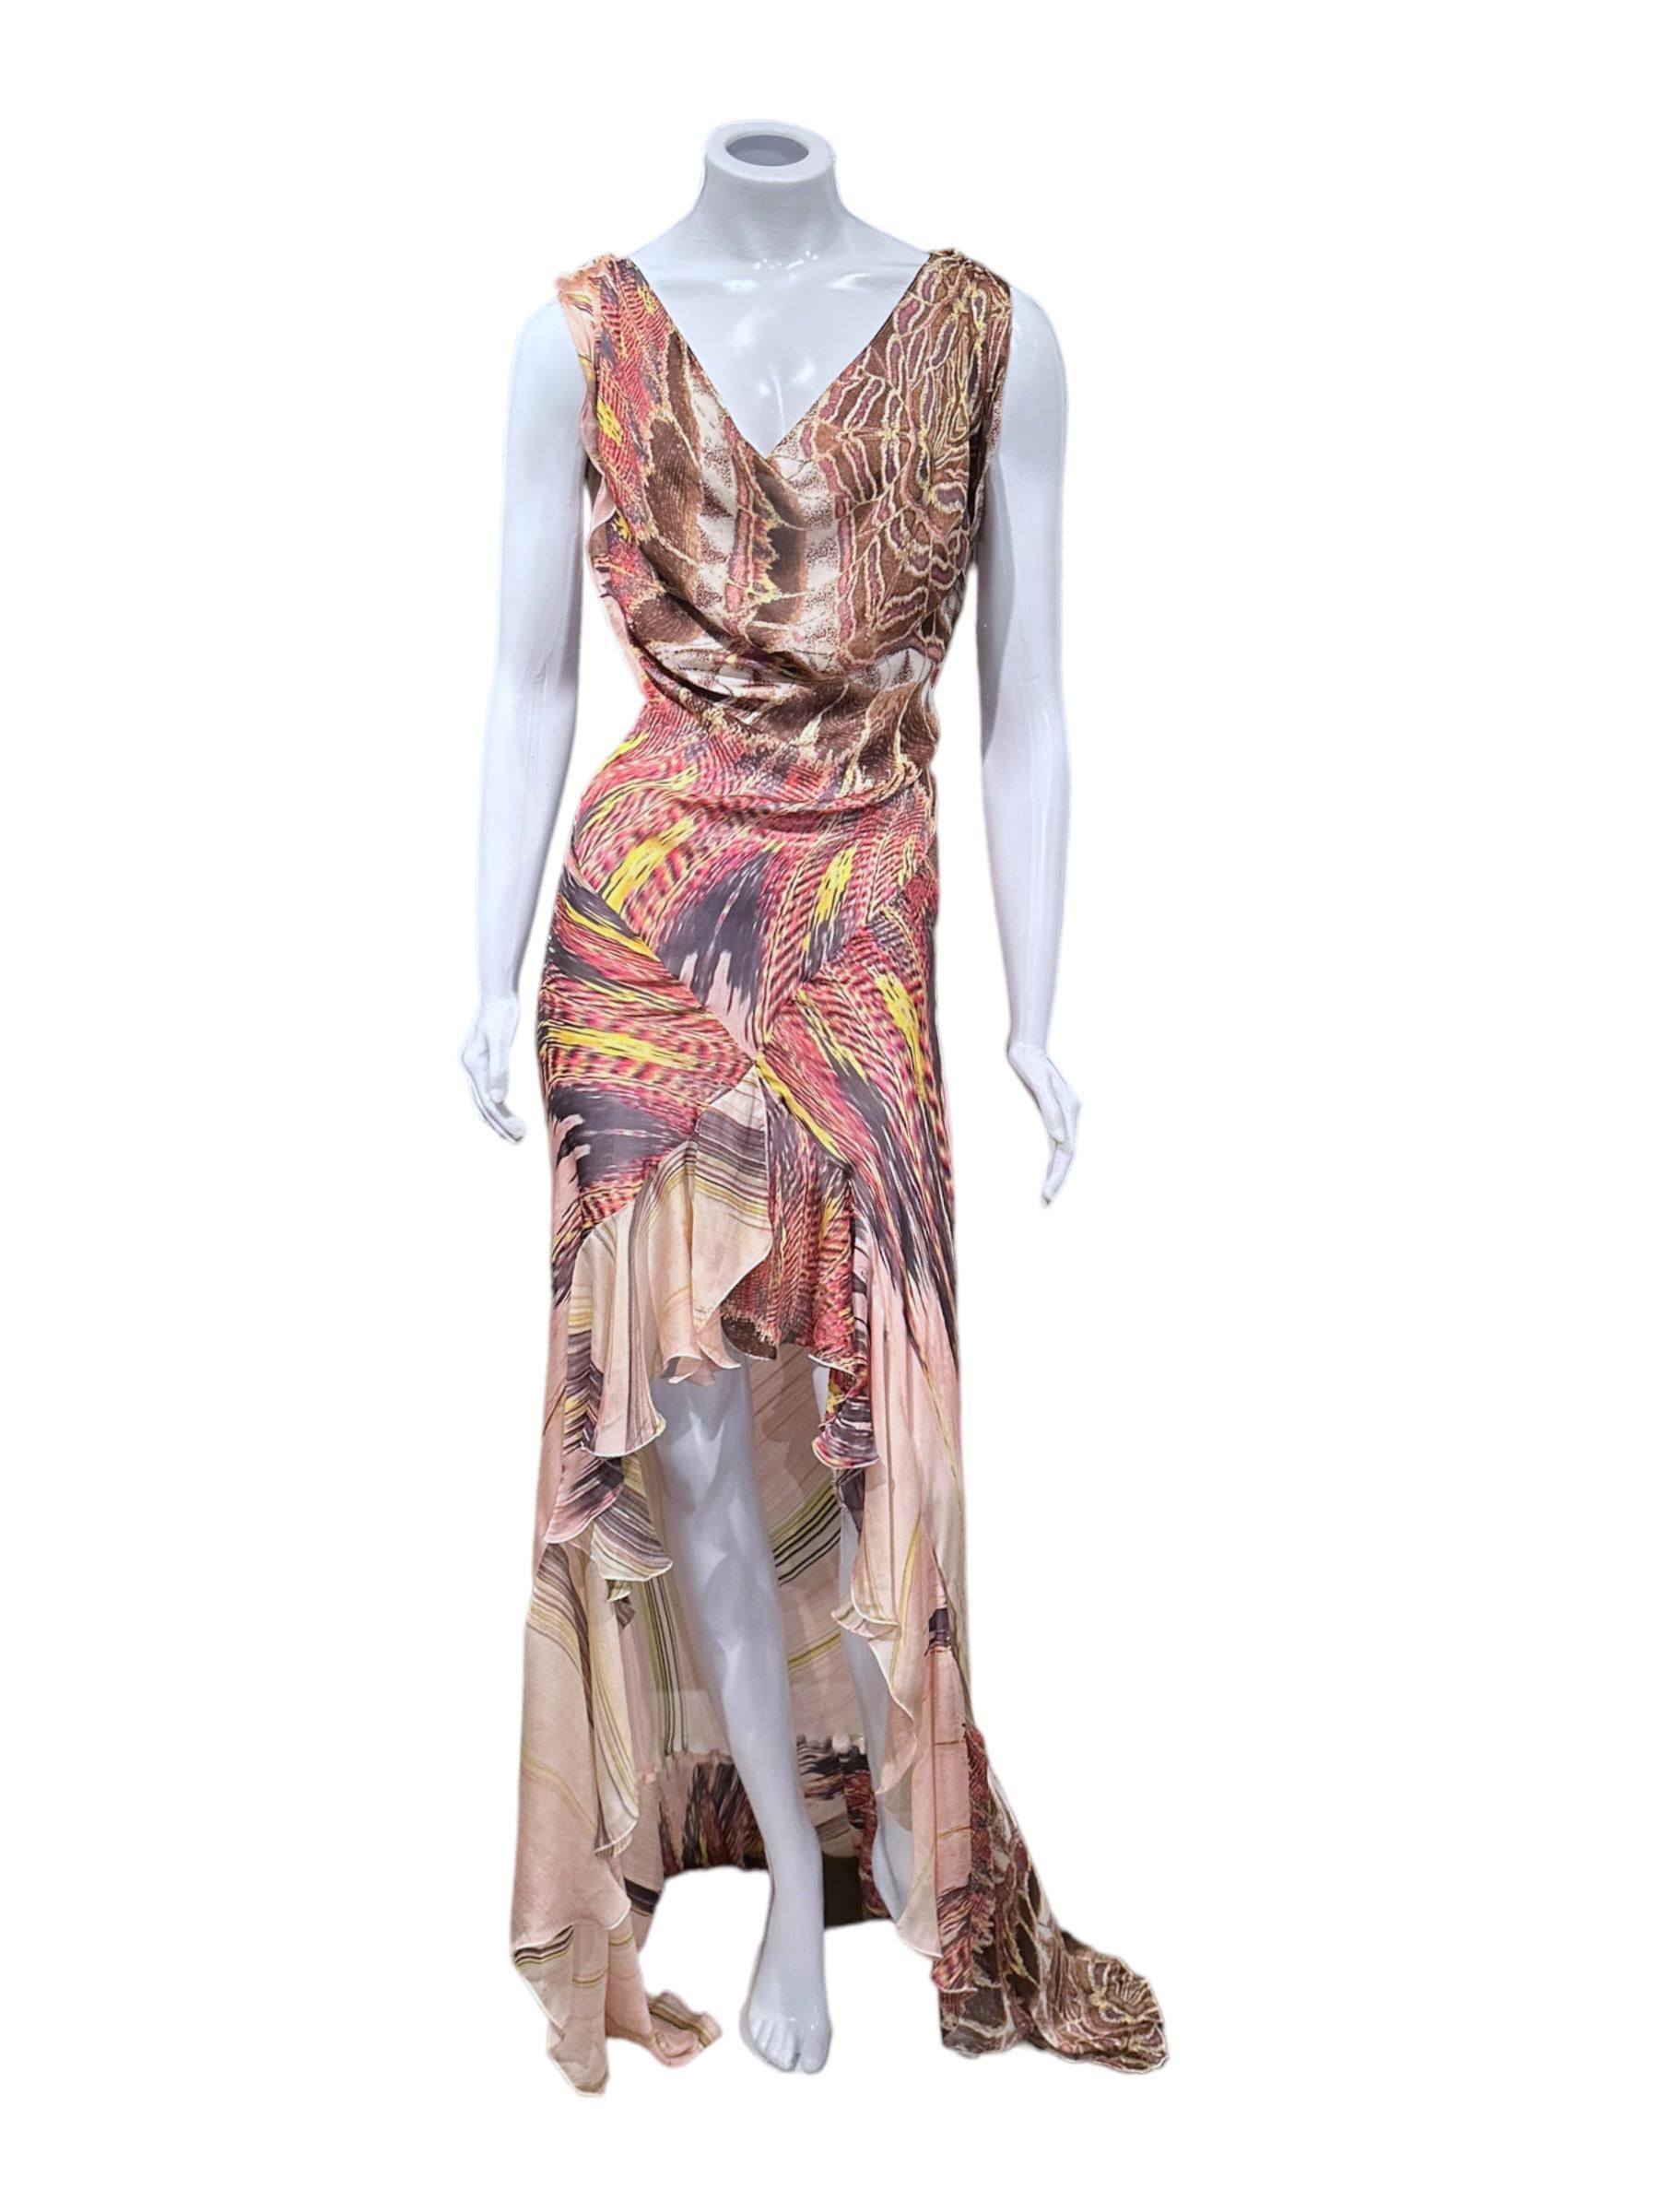 Roberto Cavalli Iconic Feather Print Ss 2004 Cowl Neck Flowy Silk Slip Gown For Sale 7